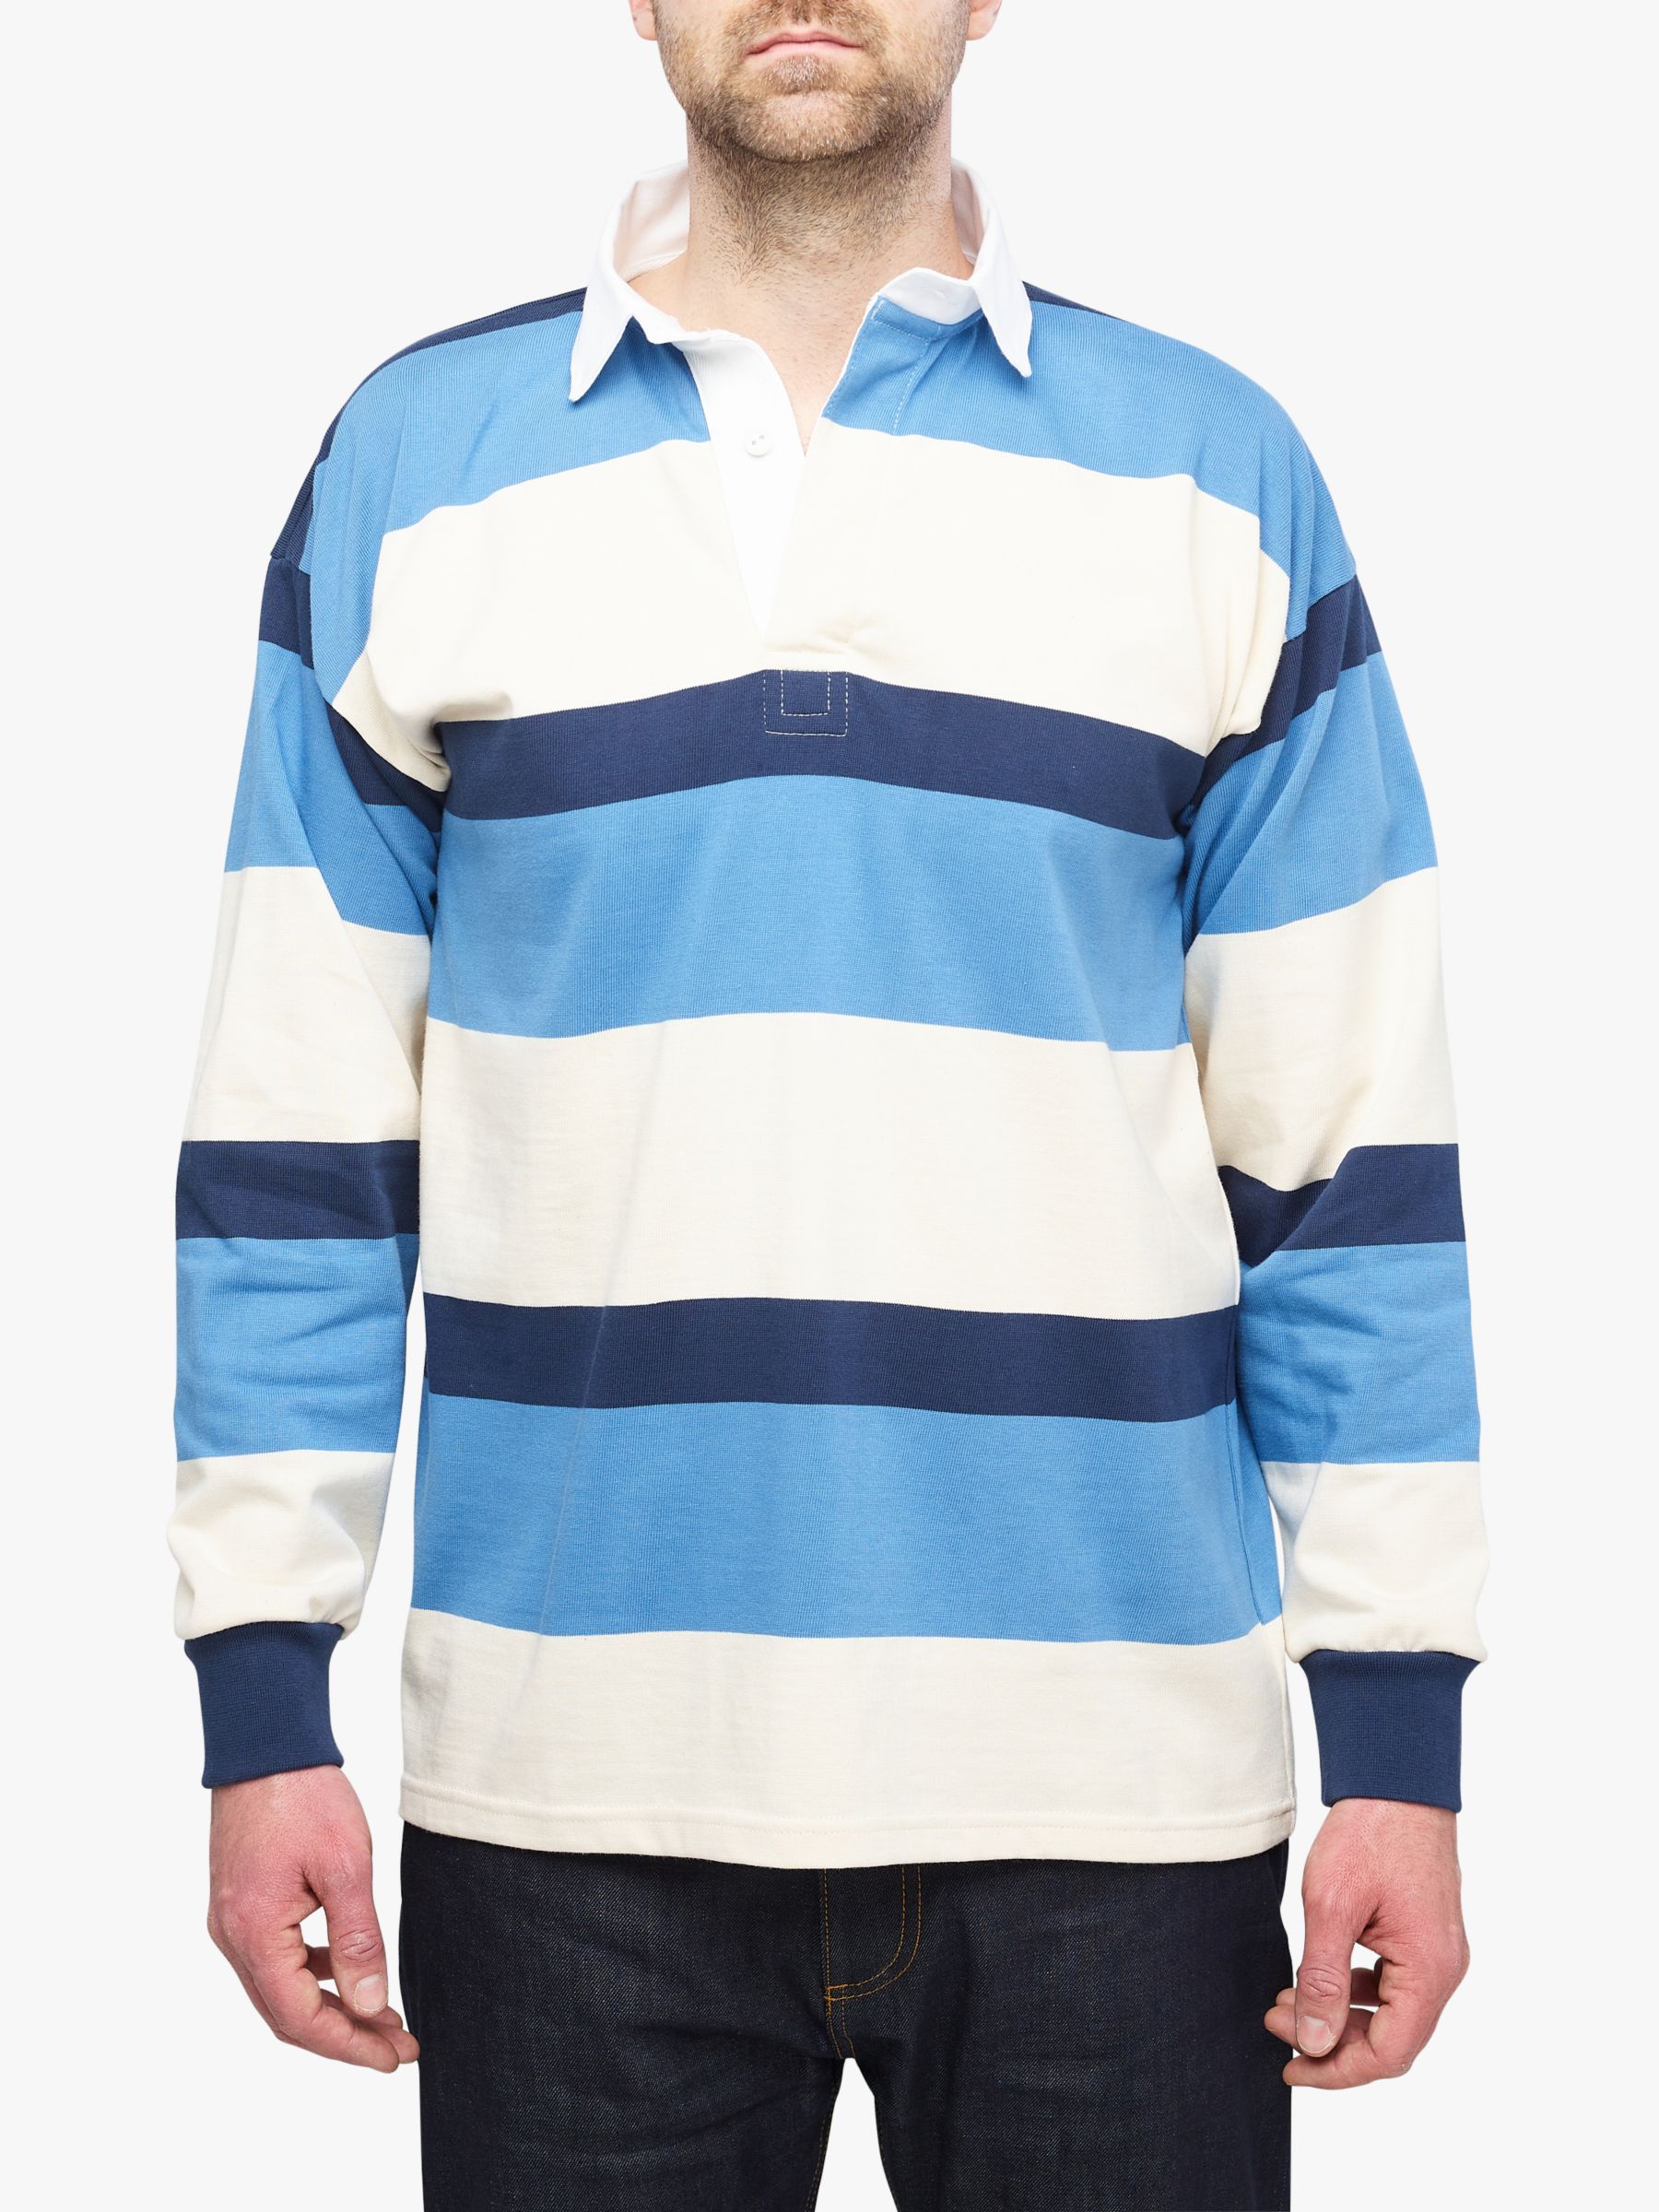 Community Clothing Stripe Rugby Shirt, Red And Blue Striped Rugby Shirt